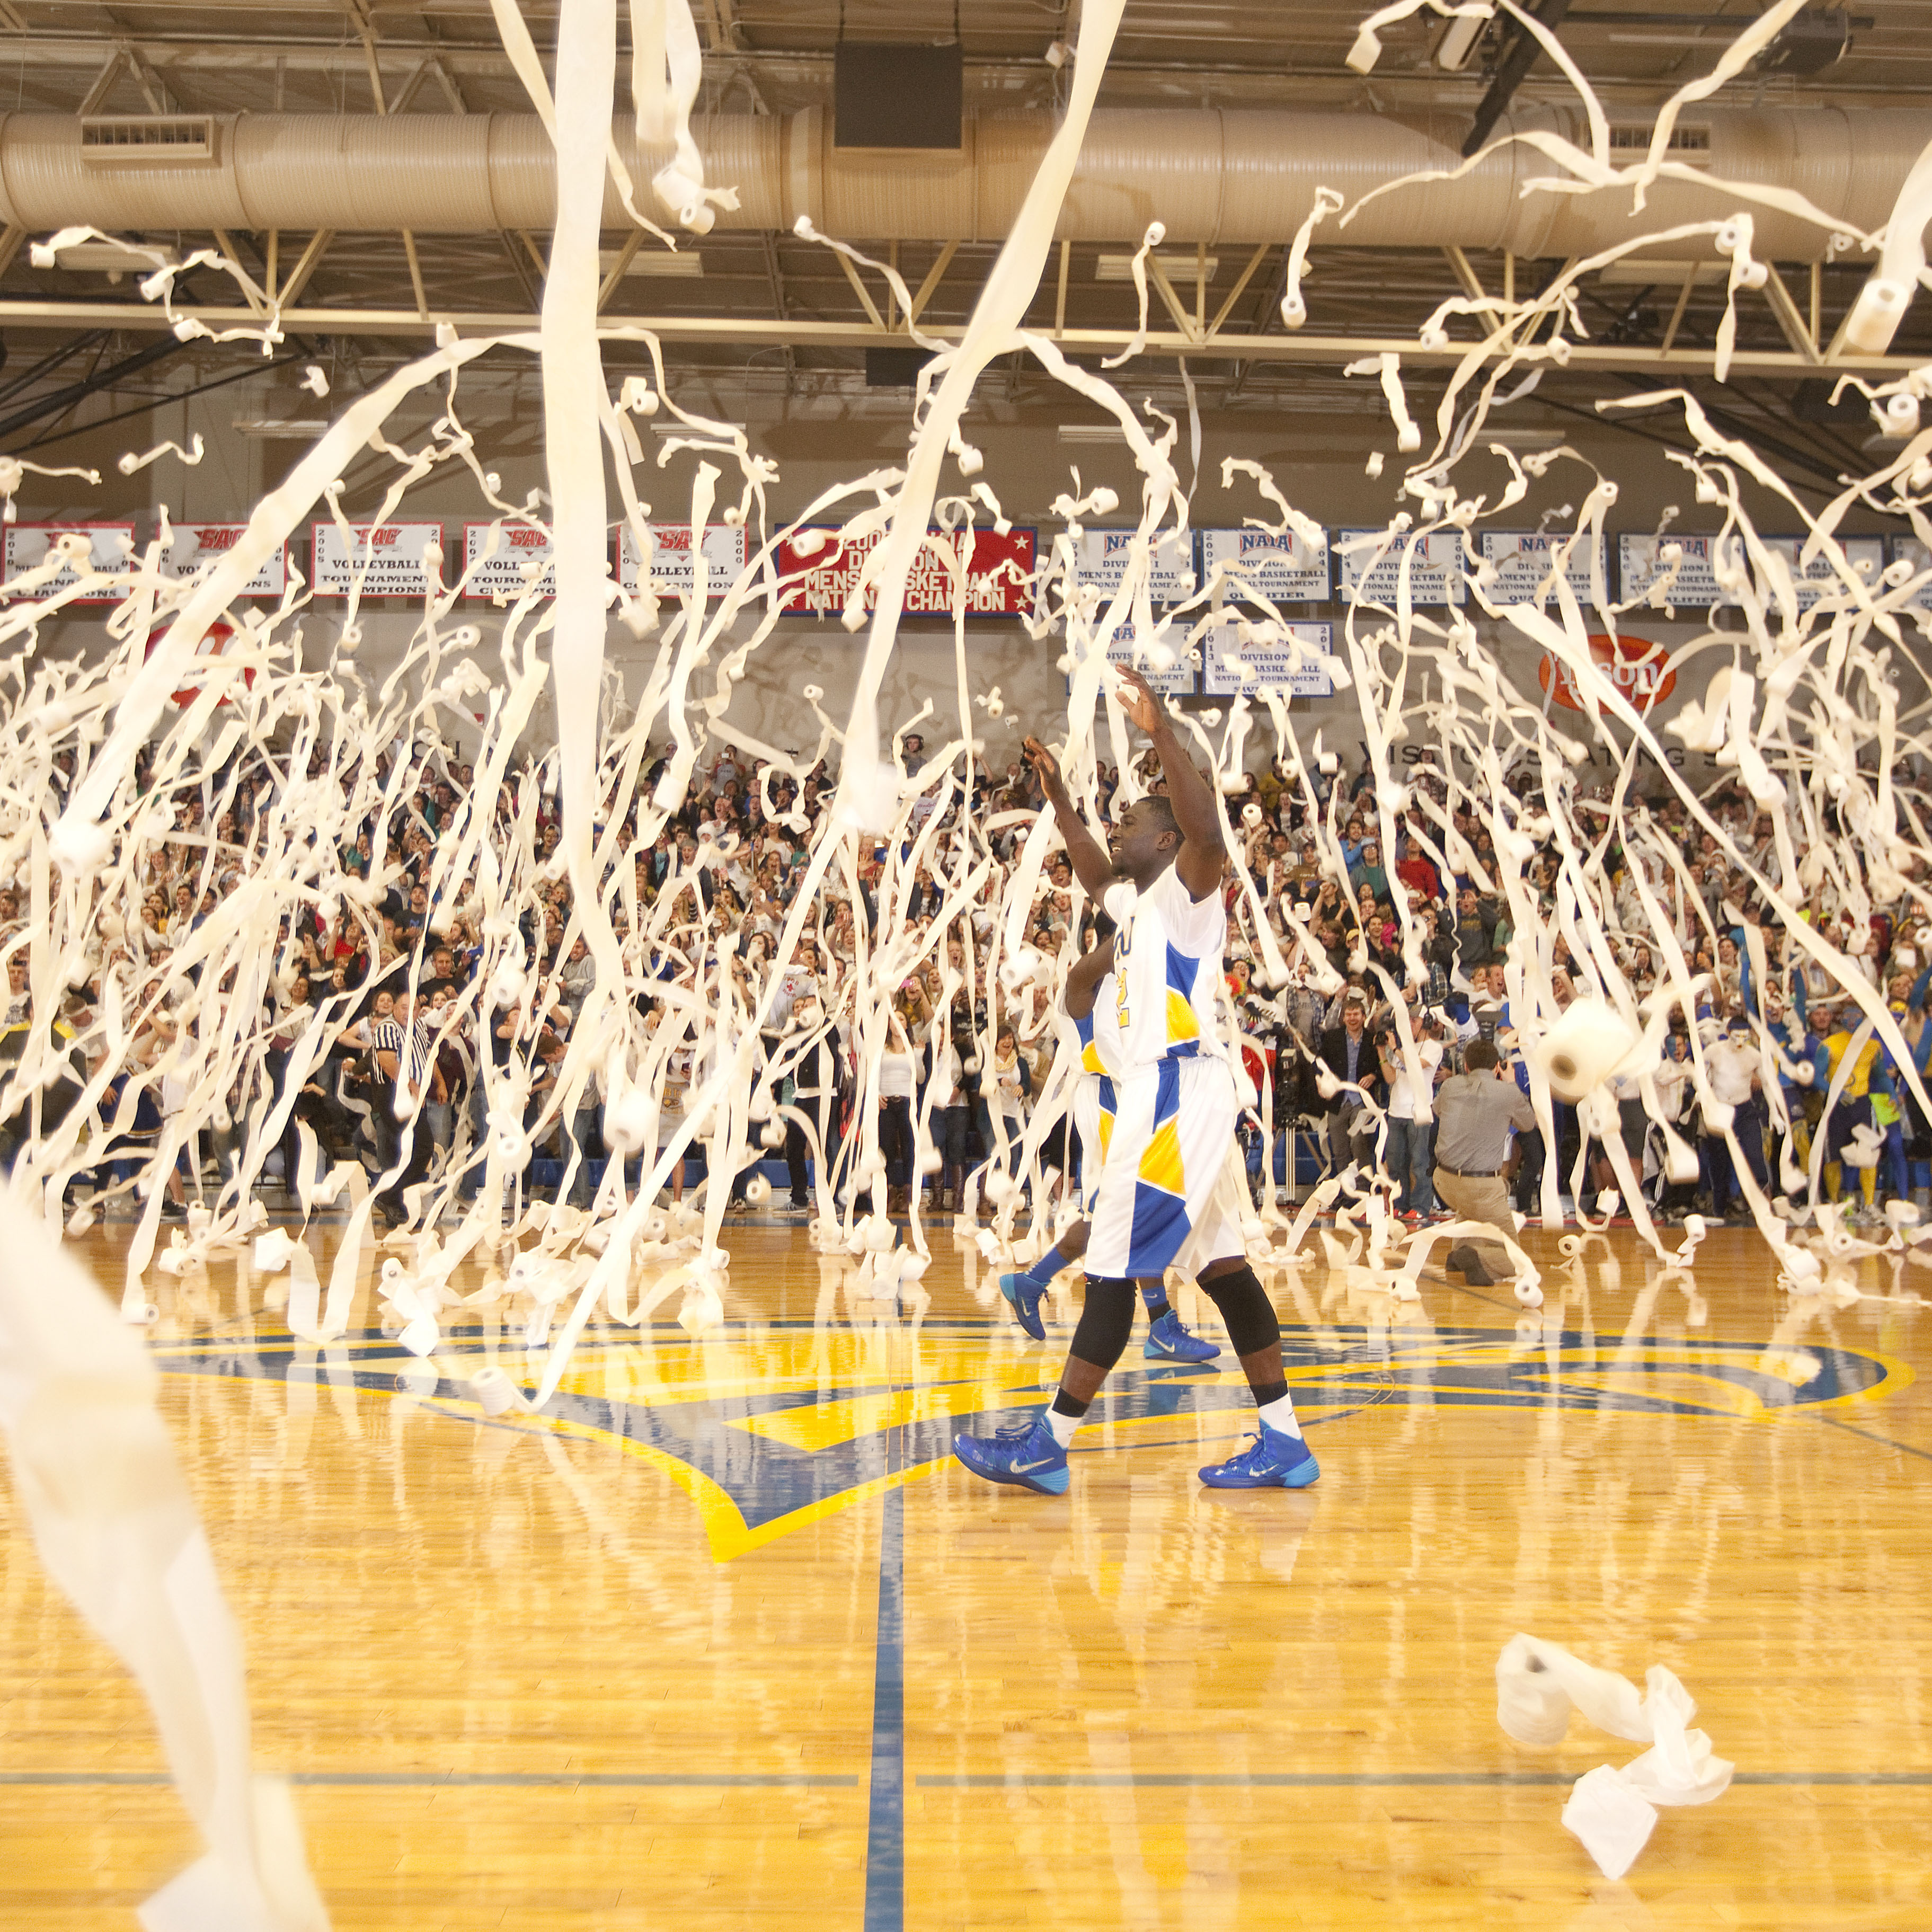 JBU Partners with Kimberly-Clark for 36th Annual Toilet Paper Game